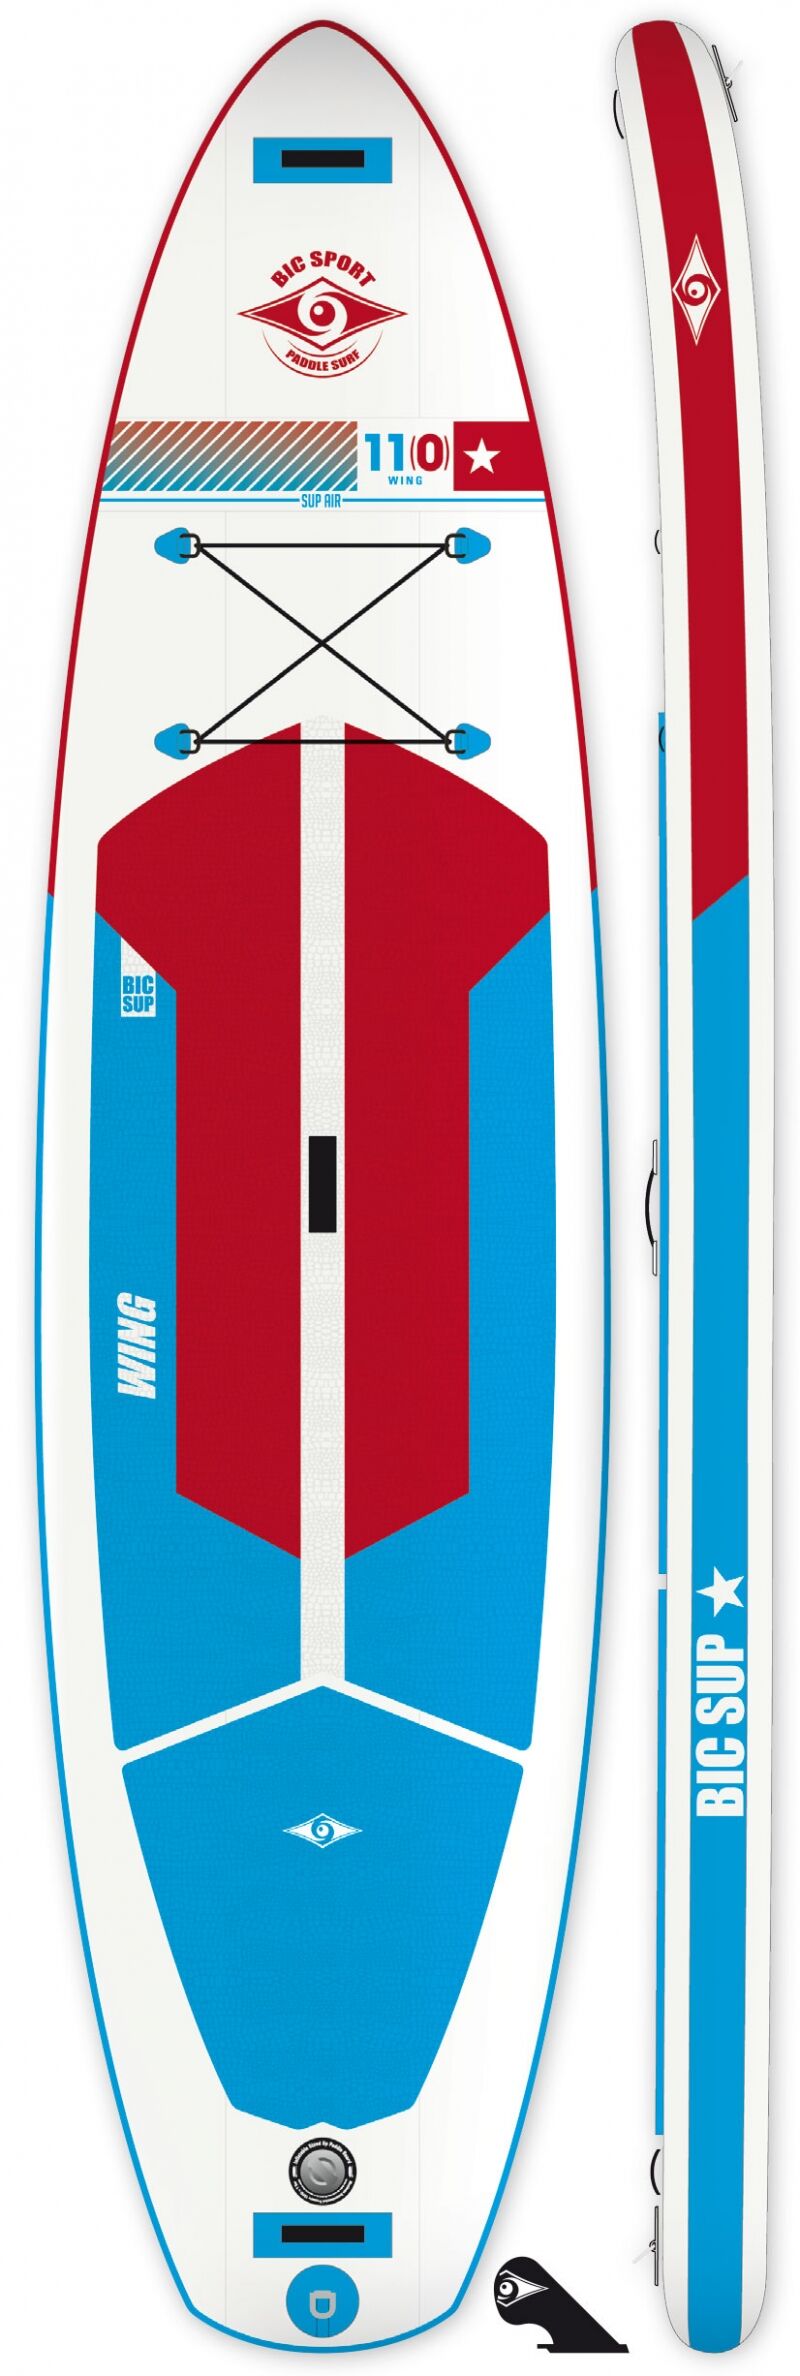 Tahe Outdoor - 11'0" Wing Air - SUP gonfiabile